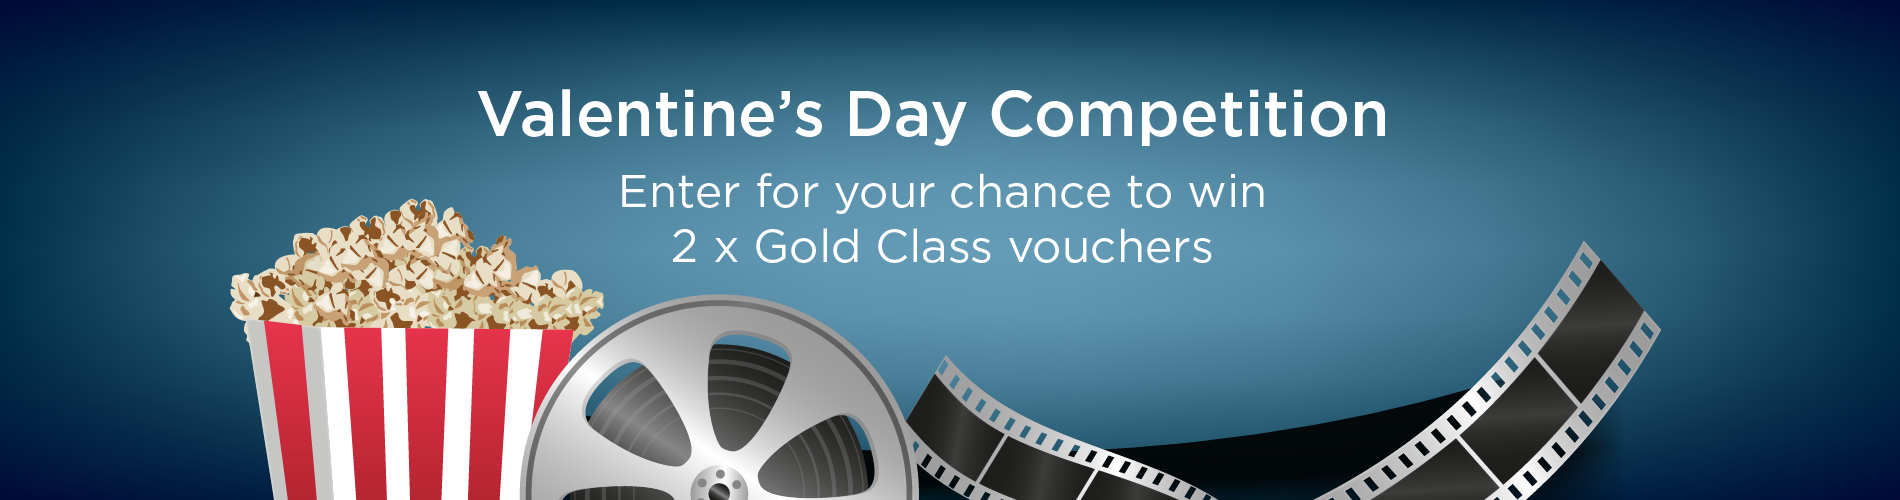 Valentines day competition